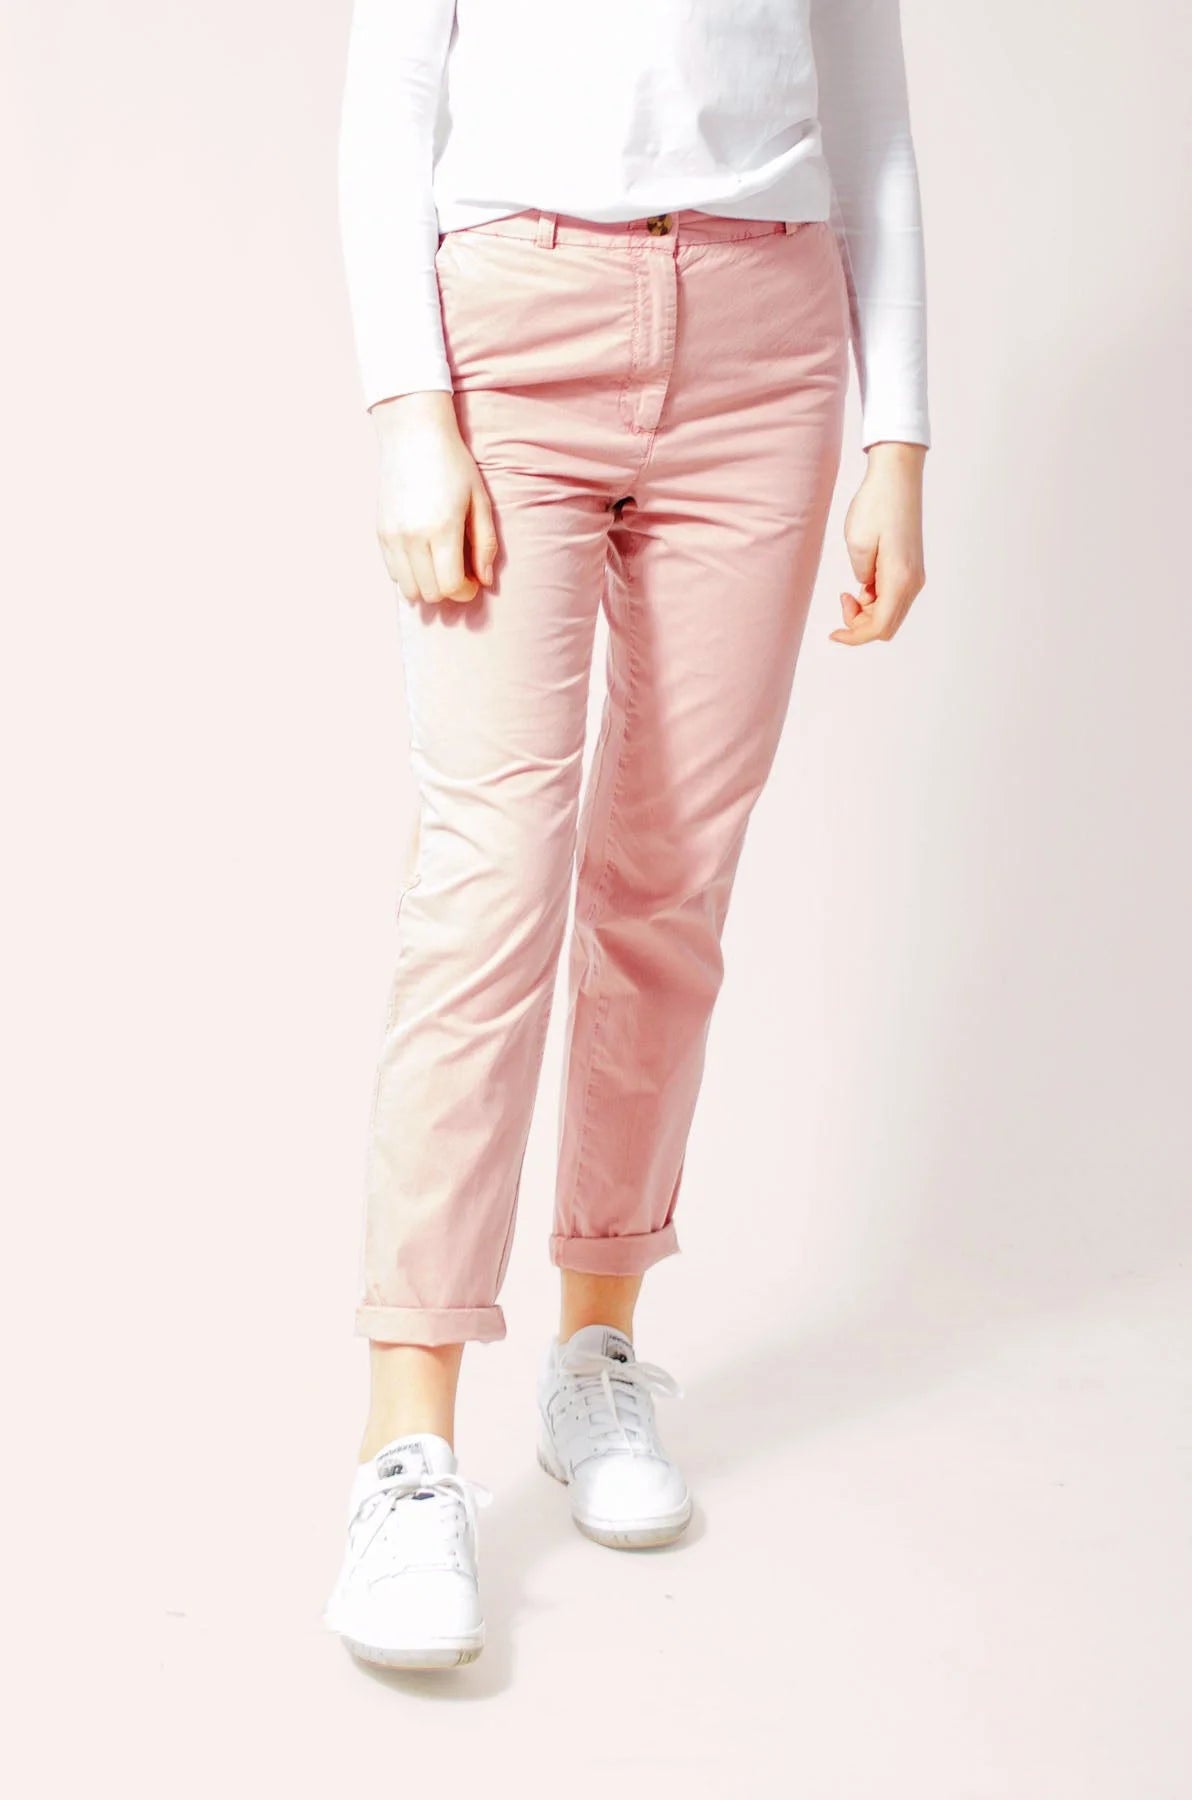 M&S Cotton Casual Chino Trousers Pale Pink / 12 / Reg